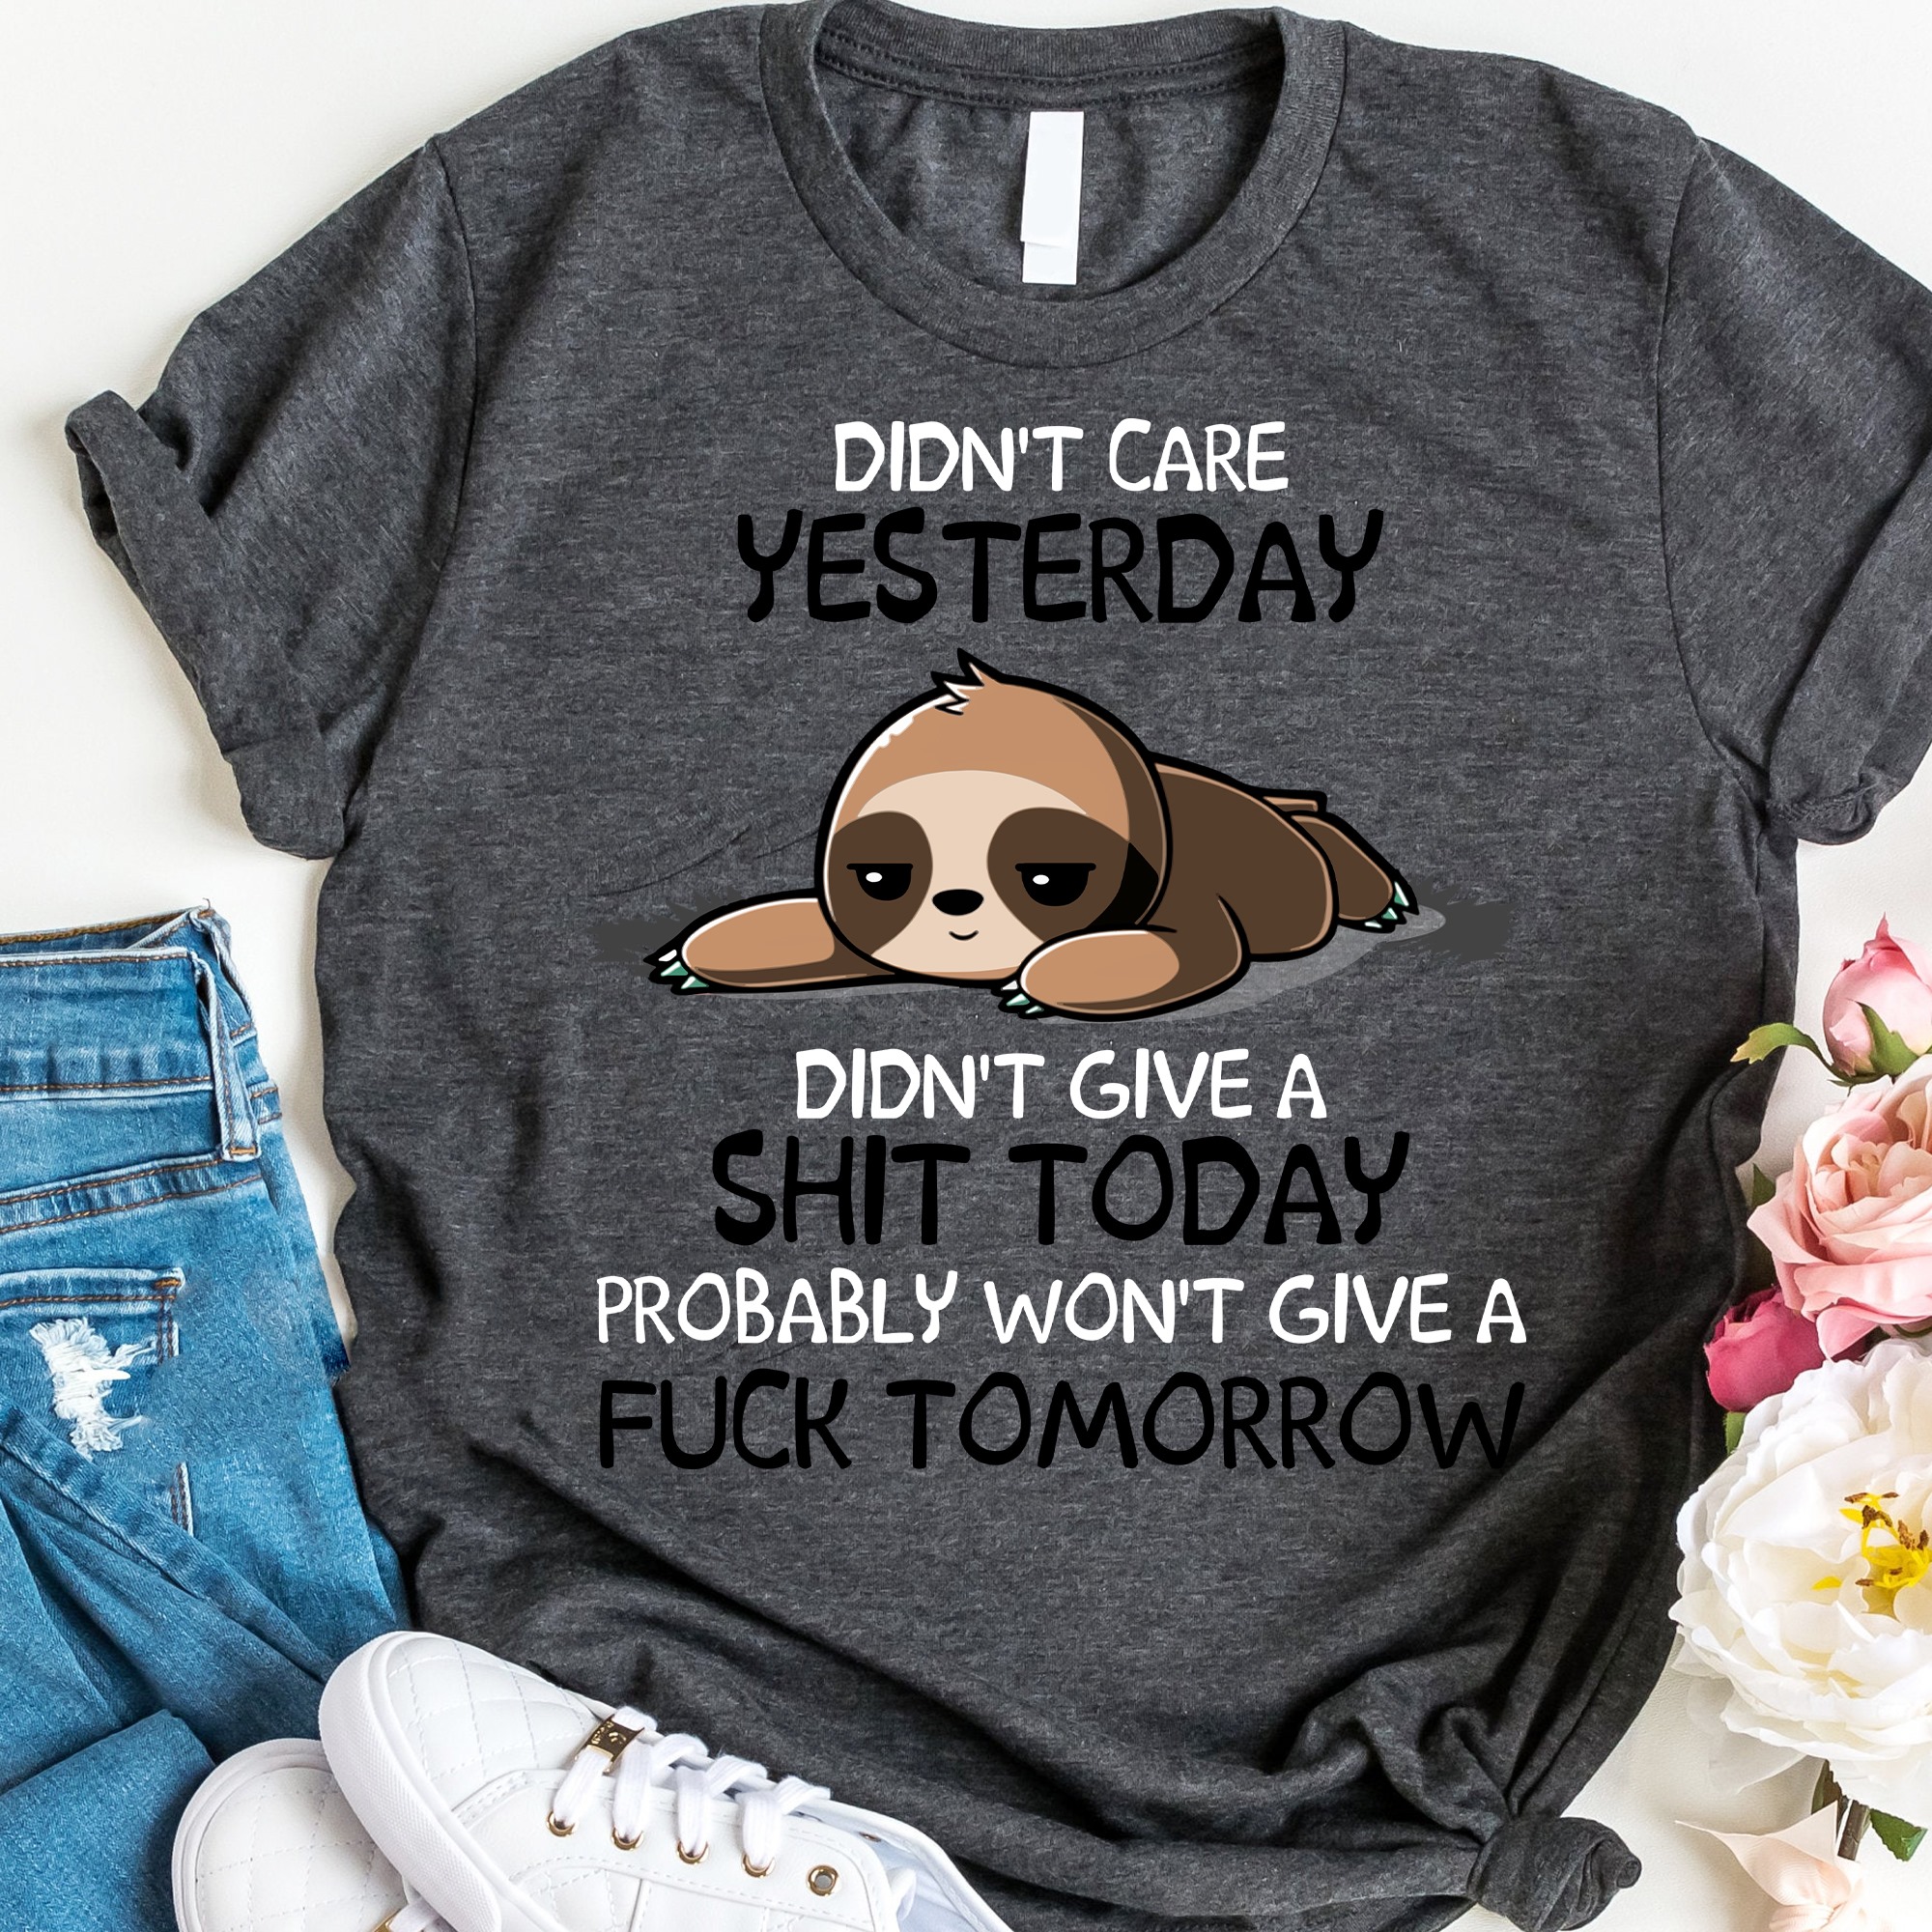 Don't care yesterday didn't give a shit today probably won't give a fuck tomorrow - Sloth